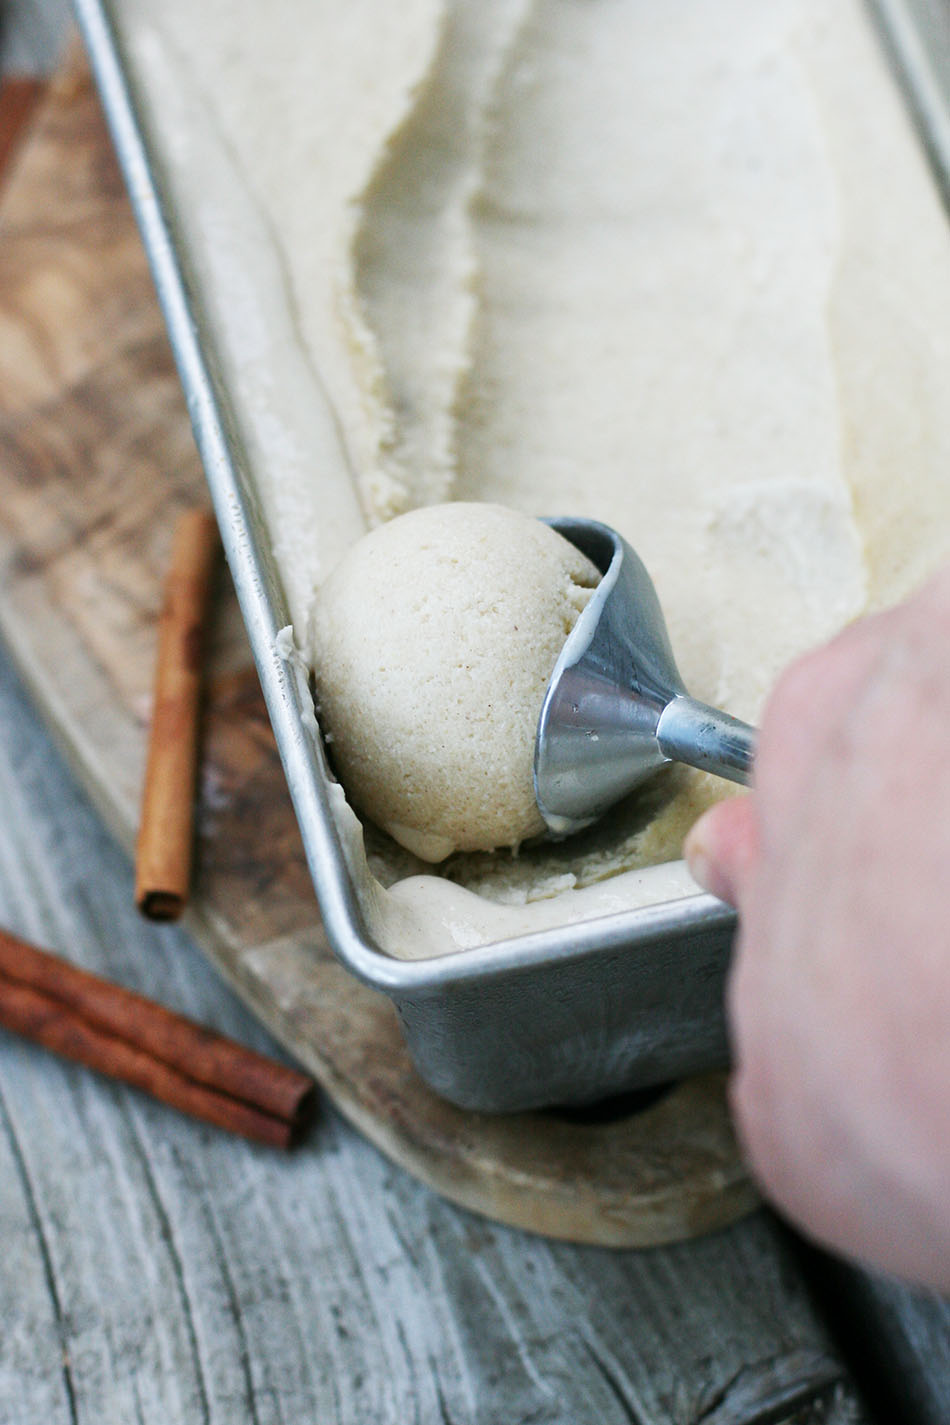 Homemade pear ice cream, made with simple ingredients. No special equipment required!